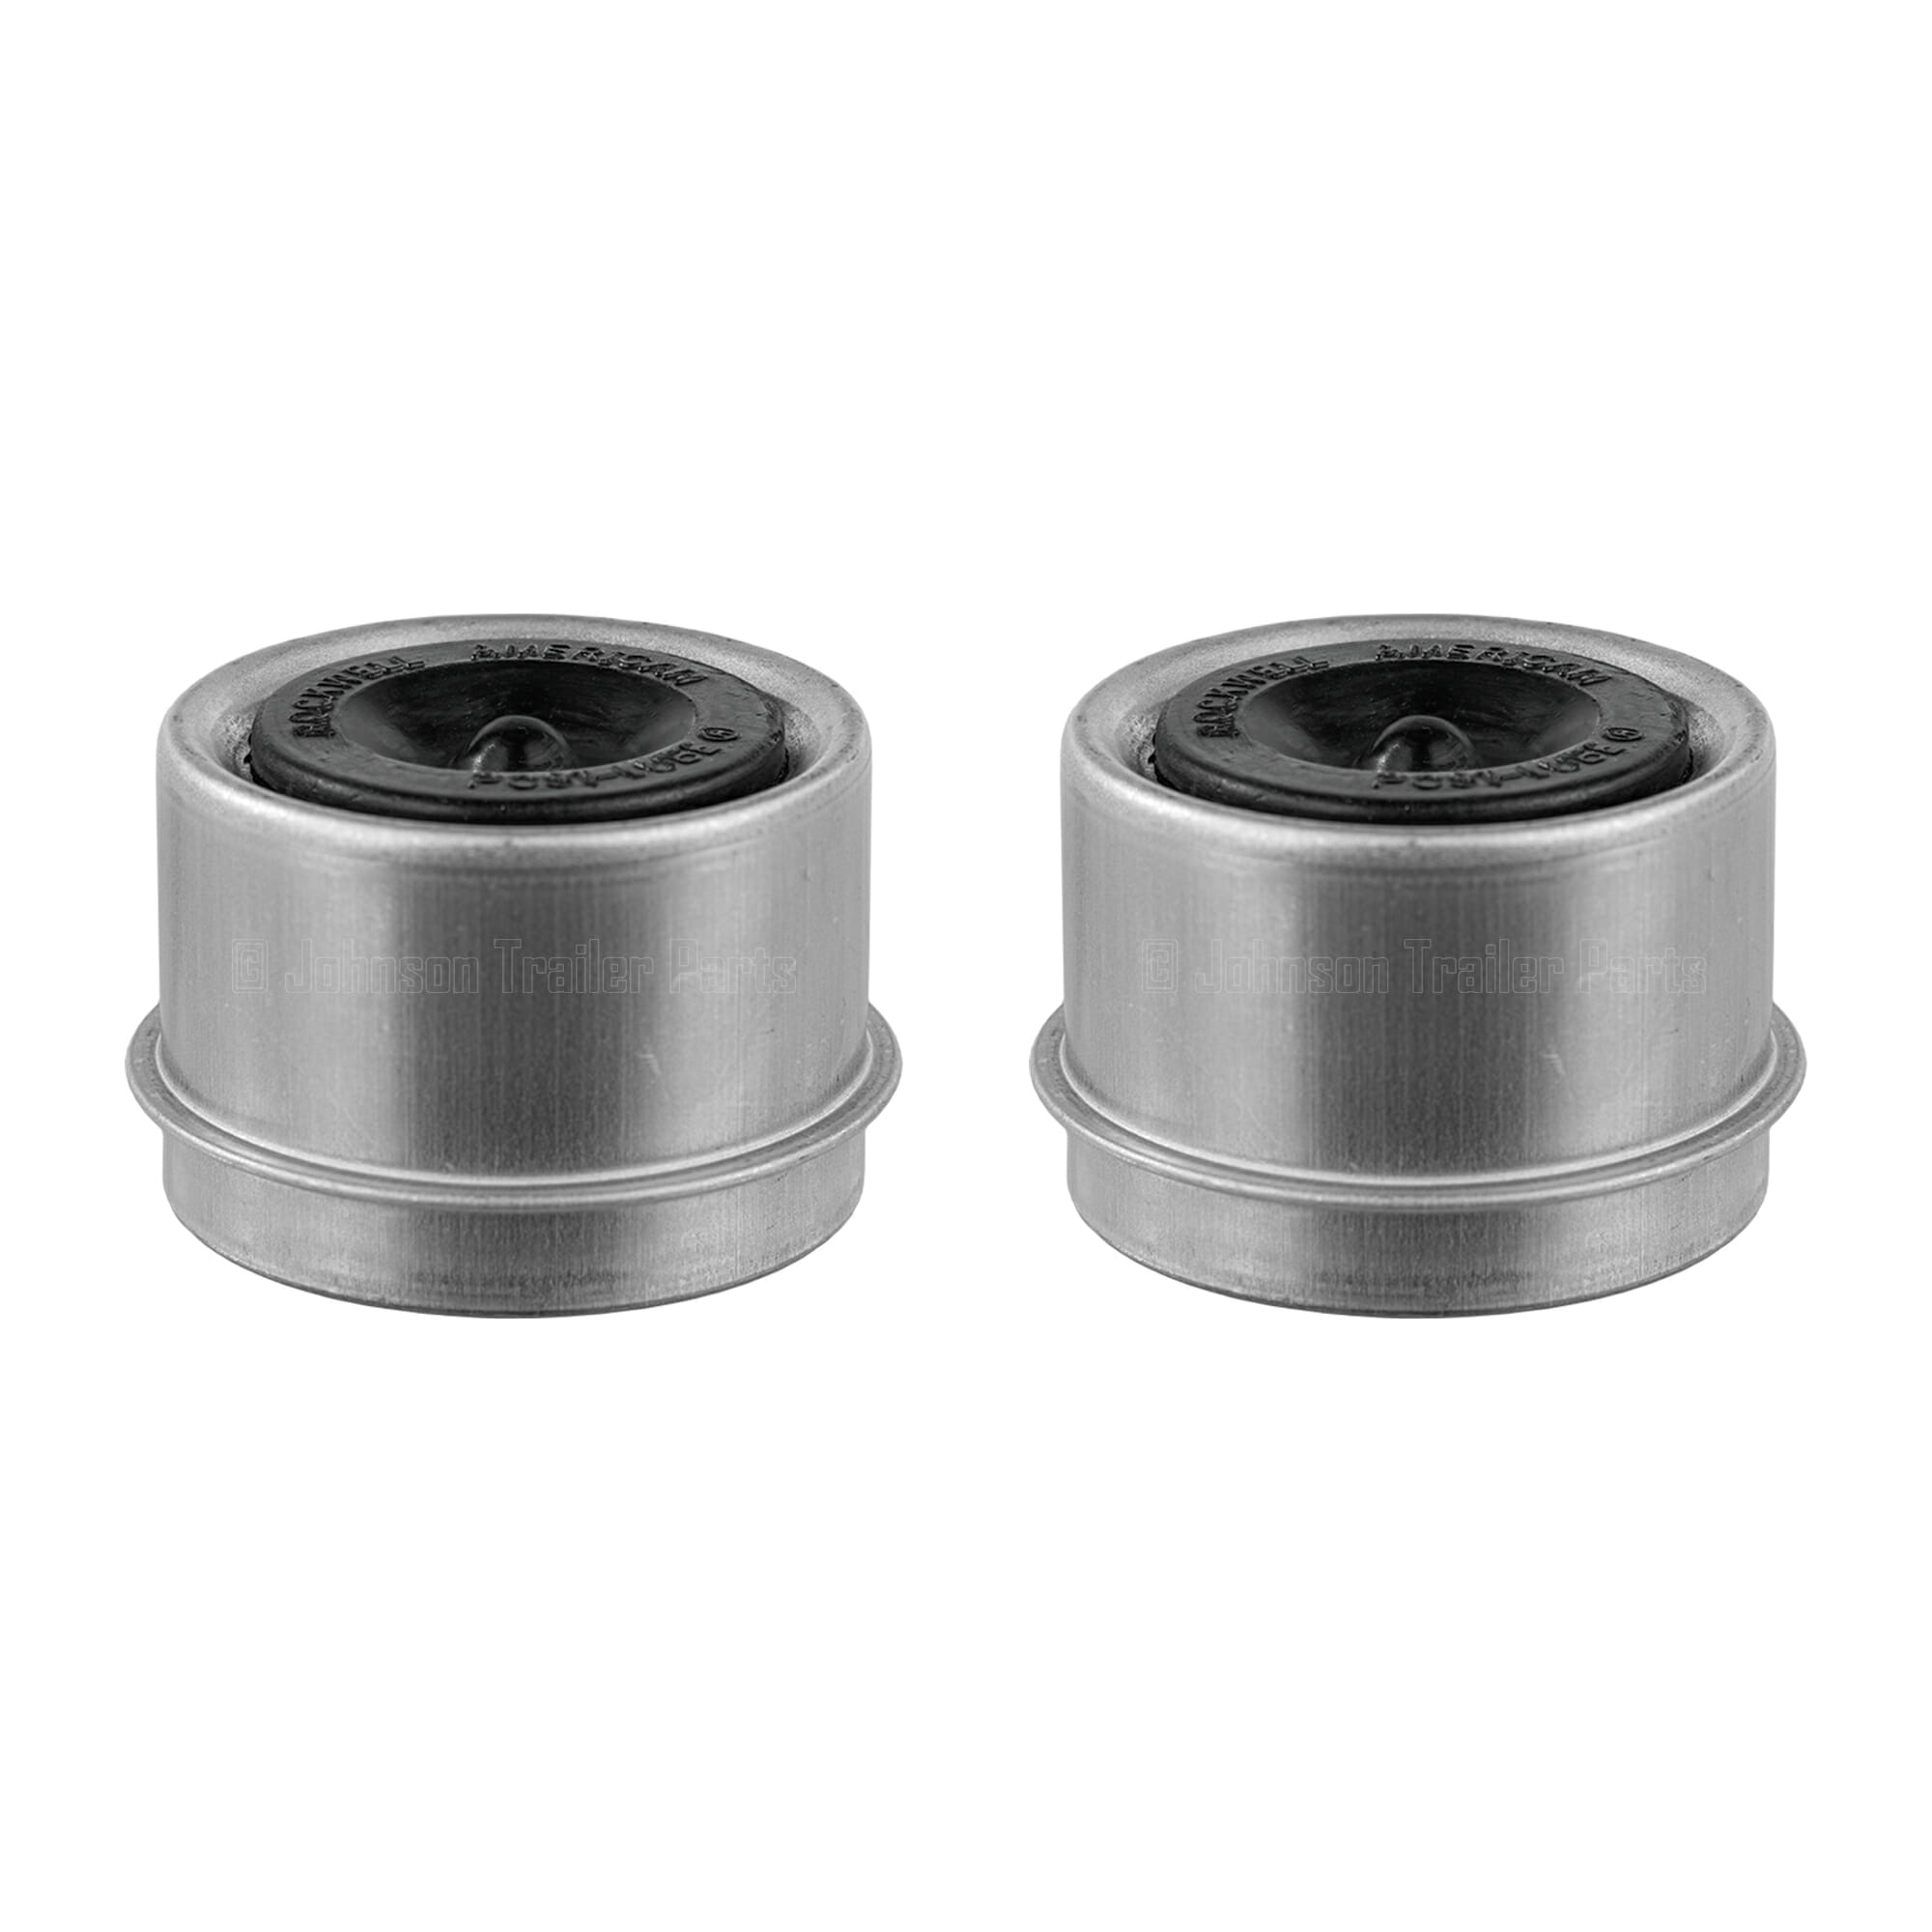 1.98 Grease Caps - Fits Most 2,000 to 3,500 lb Axles